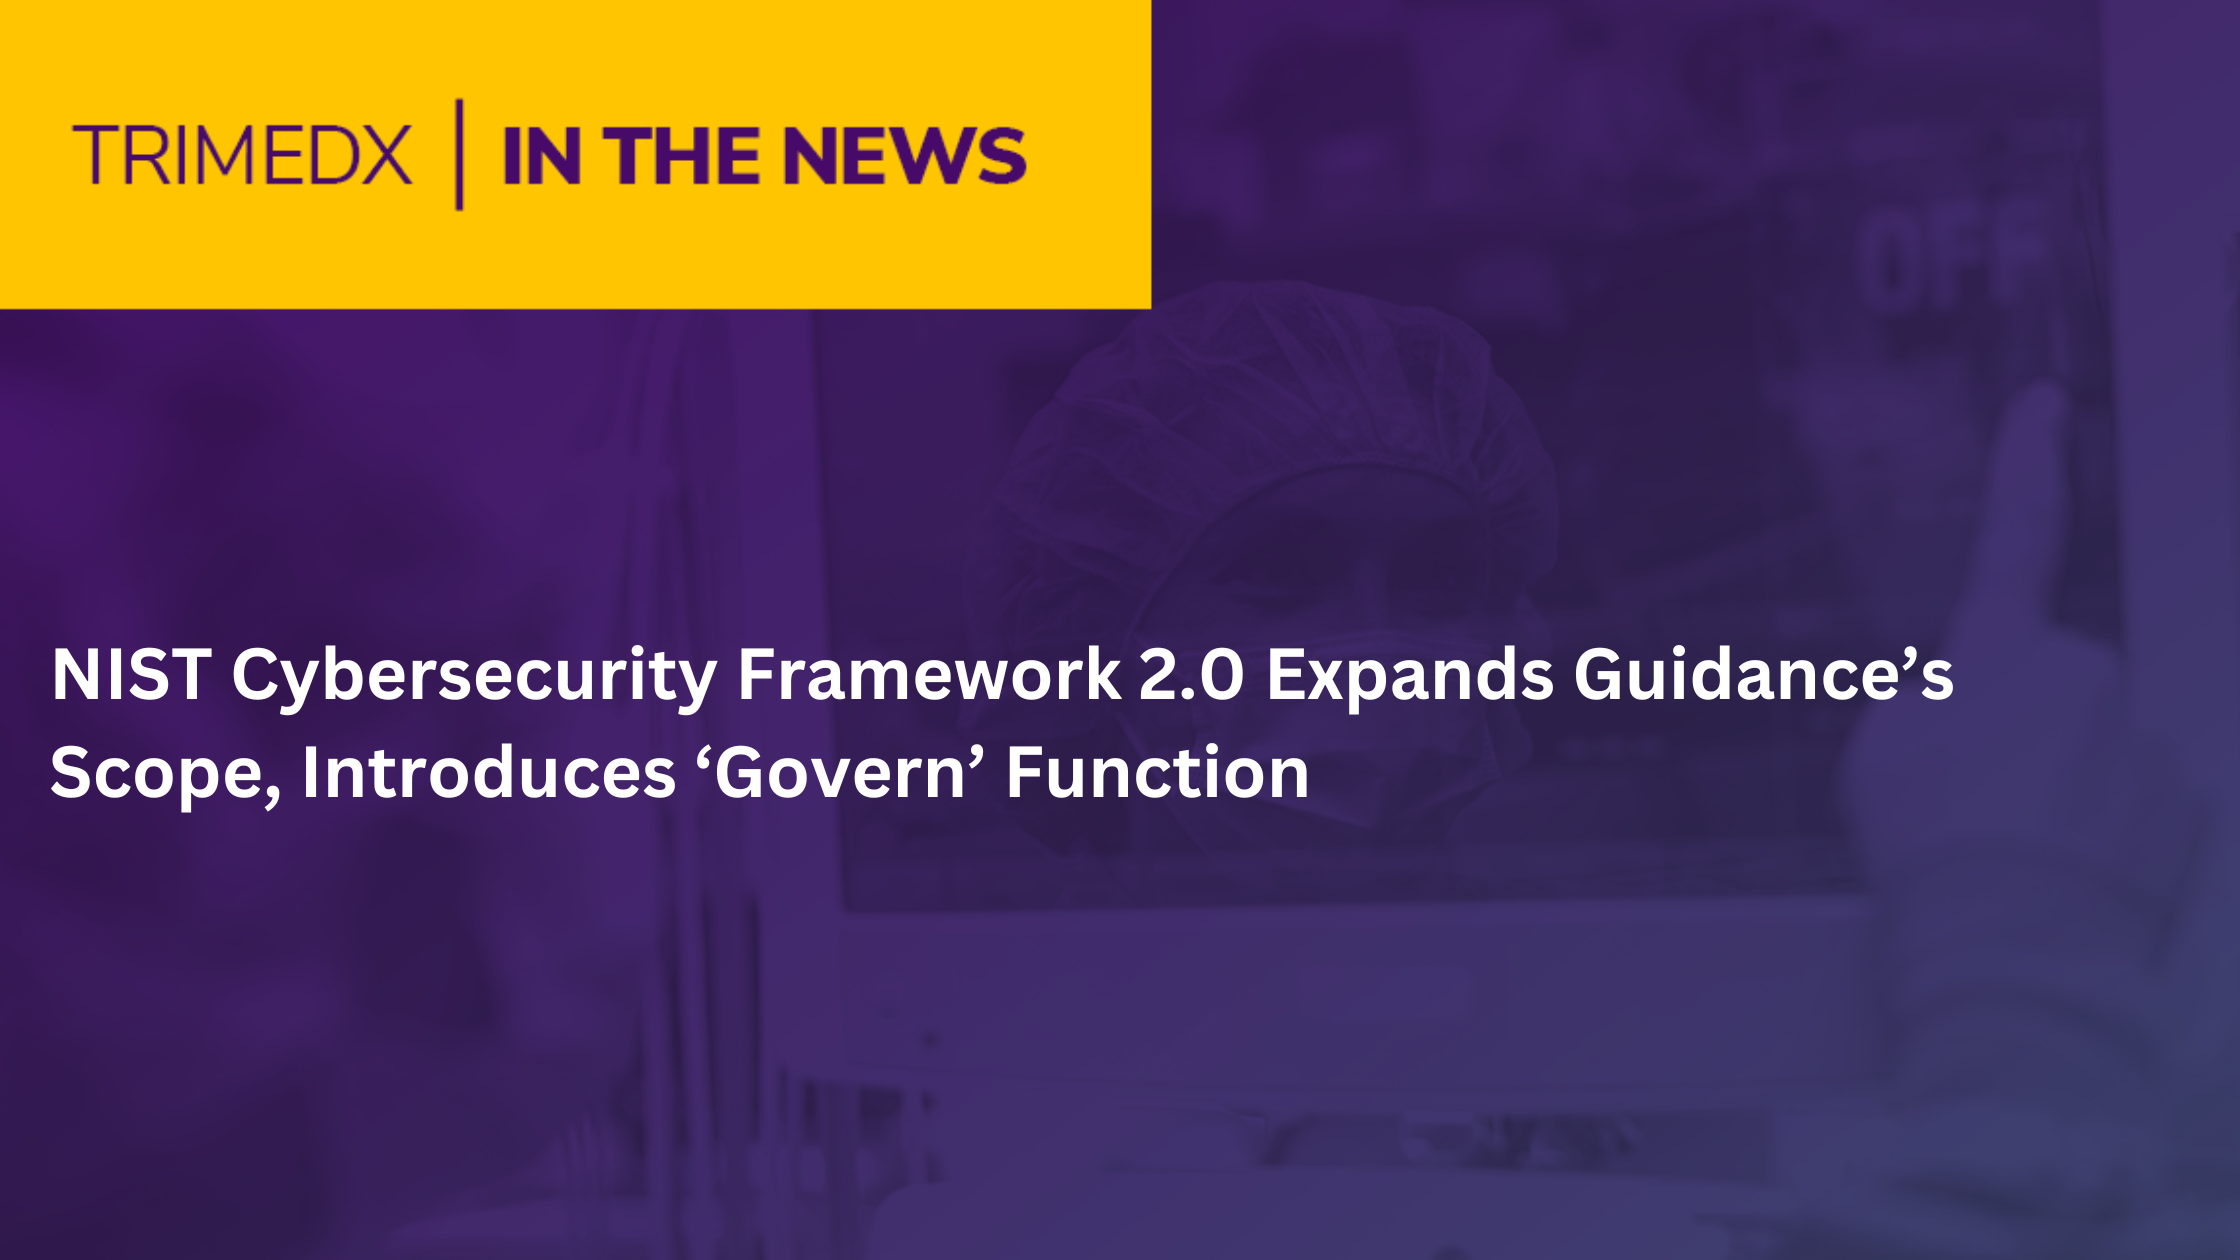 NIST Cybersecurity Framework 2.0 Expands Guidance’s Scope, Introduces ‘Govern’ Function